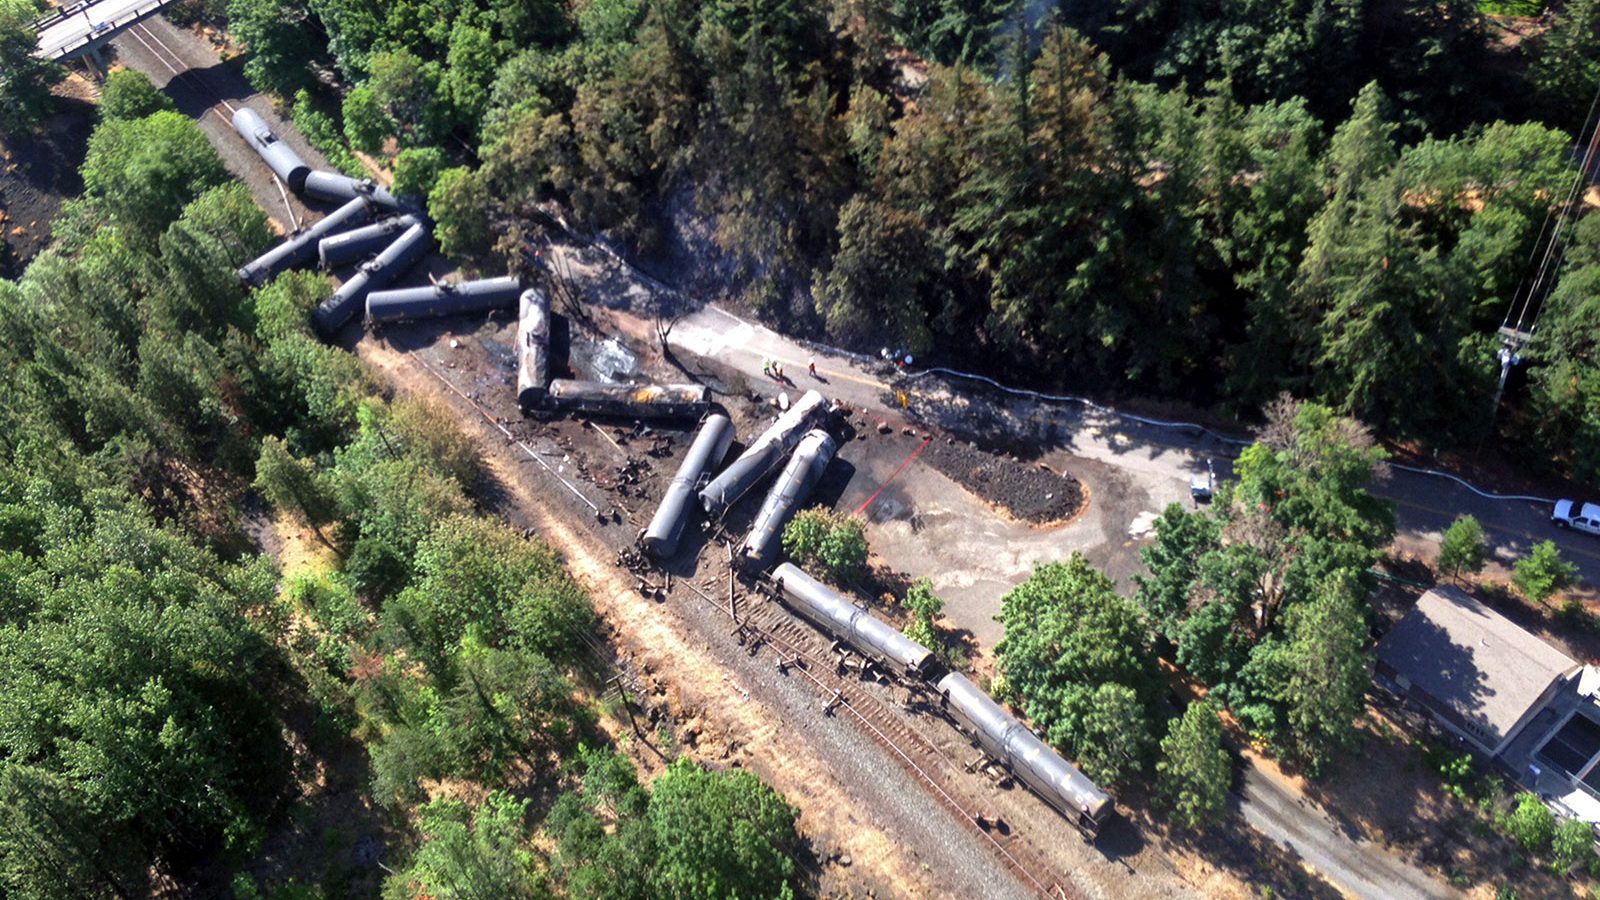 Scattered and burned oil tank cars after a train derailed and burned near Mosier, Oregon.